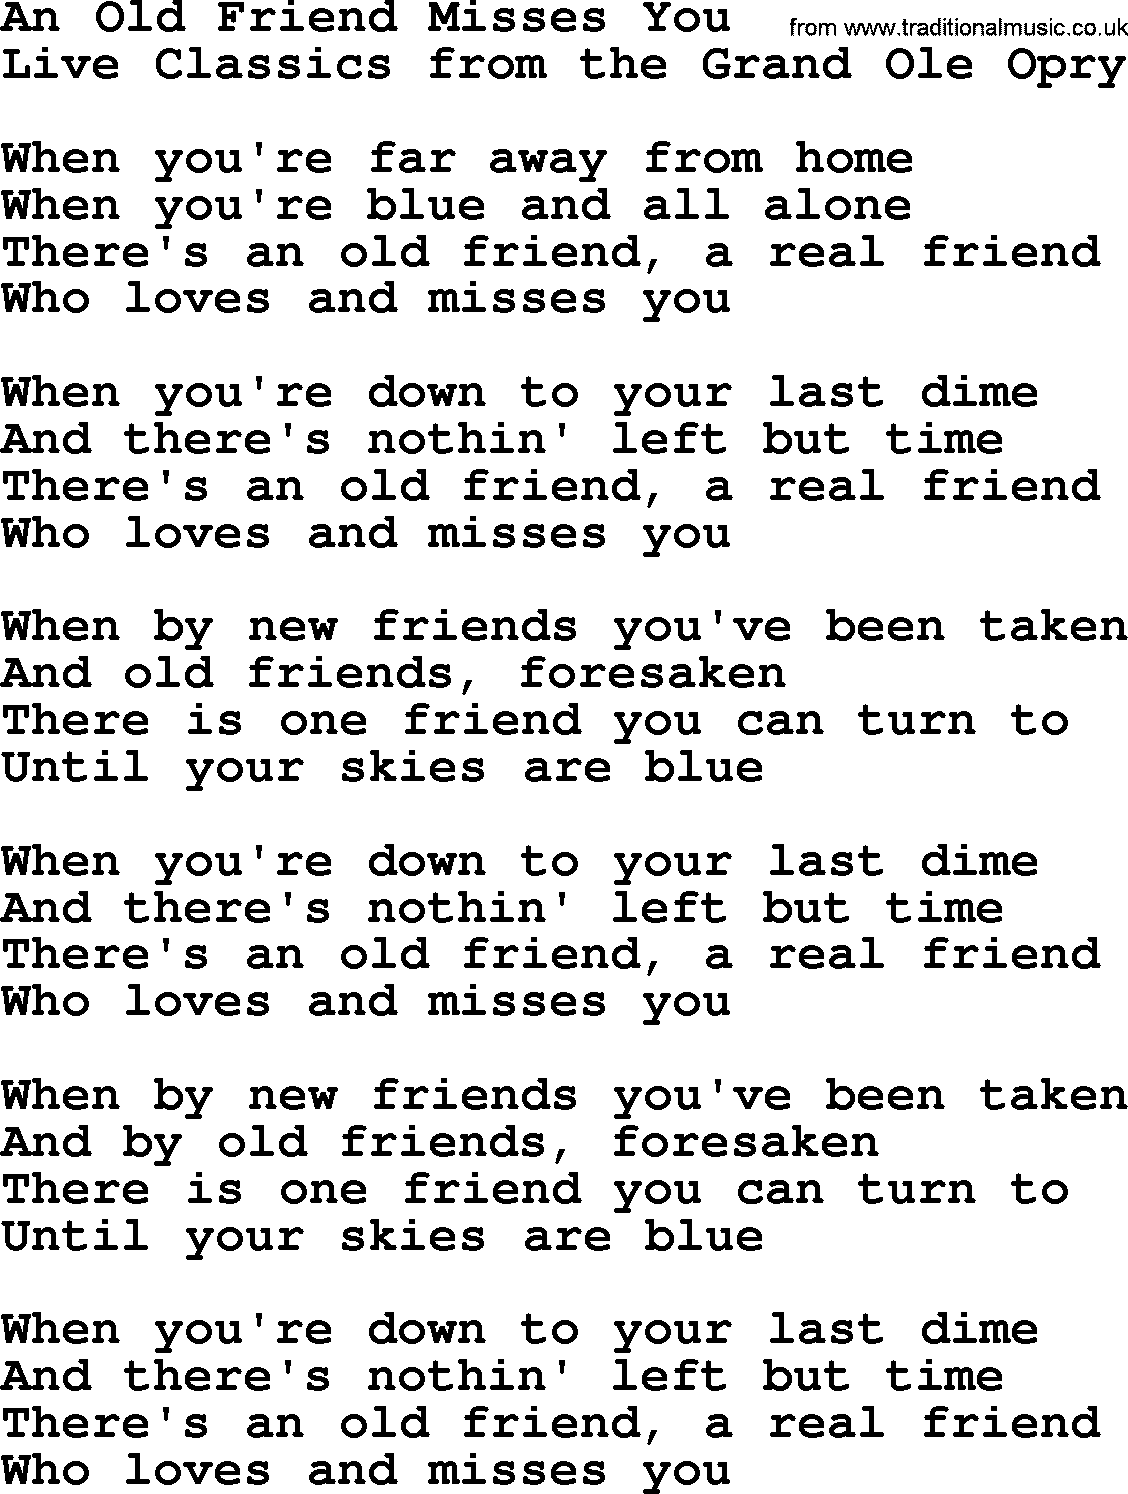 Marty Robbins song: An Old Friend Misses You, lyrics